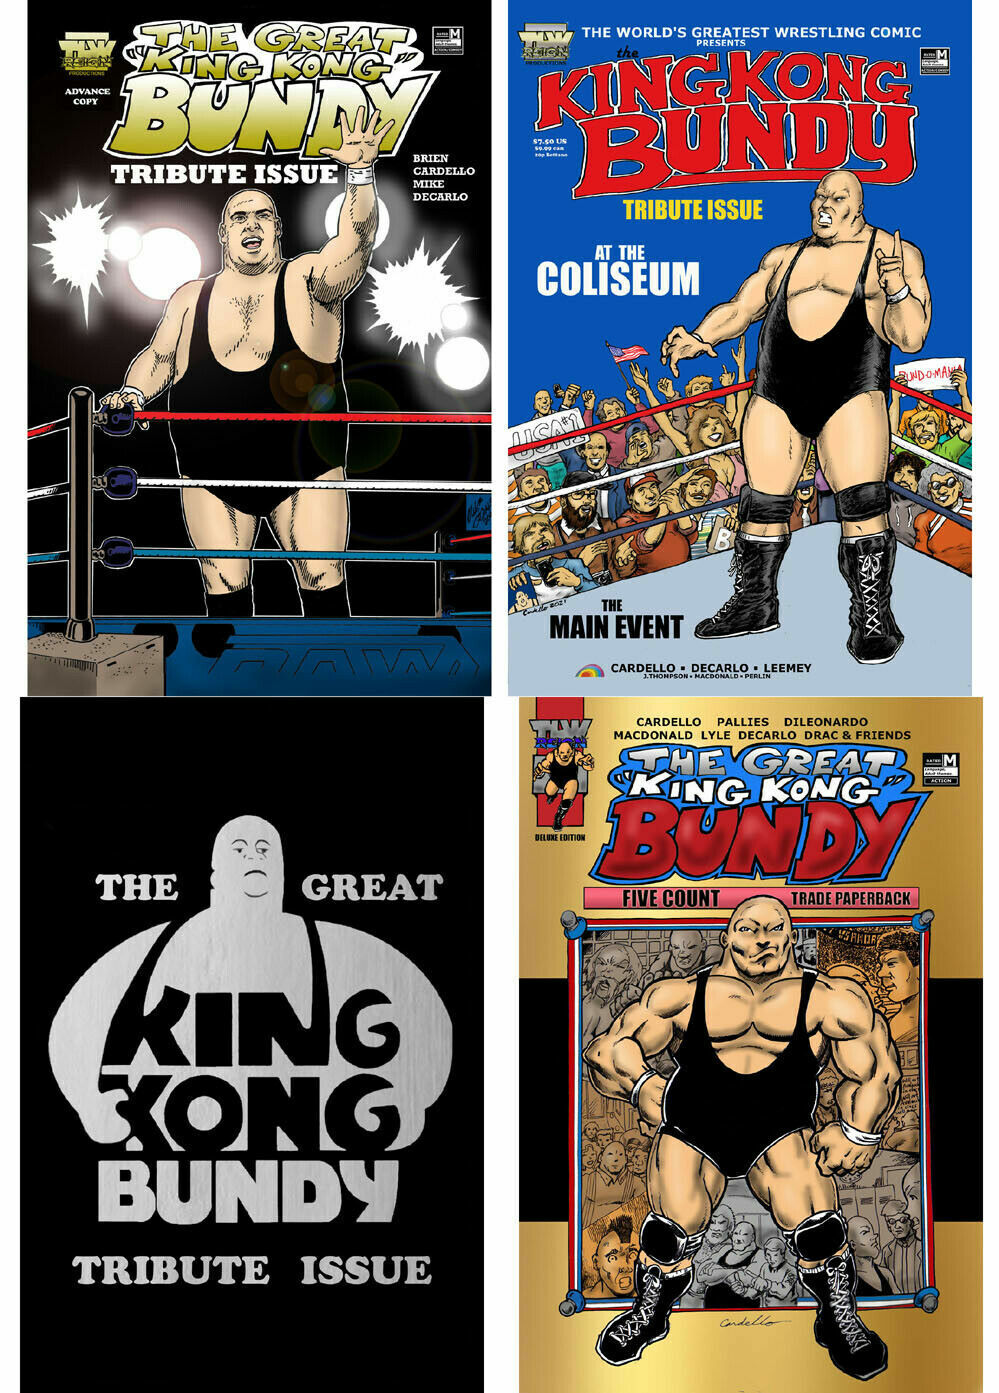  ♔ The official KING KONG BUNDY ♔ comic book tribute issue &  TPB   wwf wwe ljn